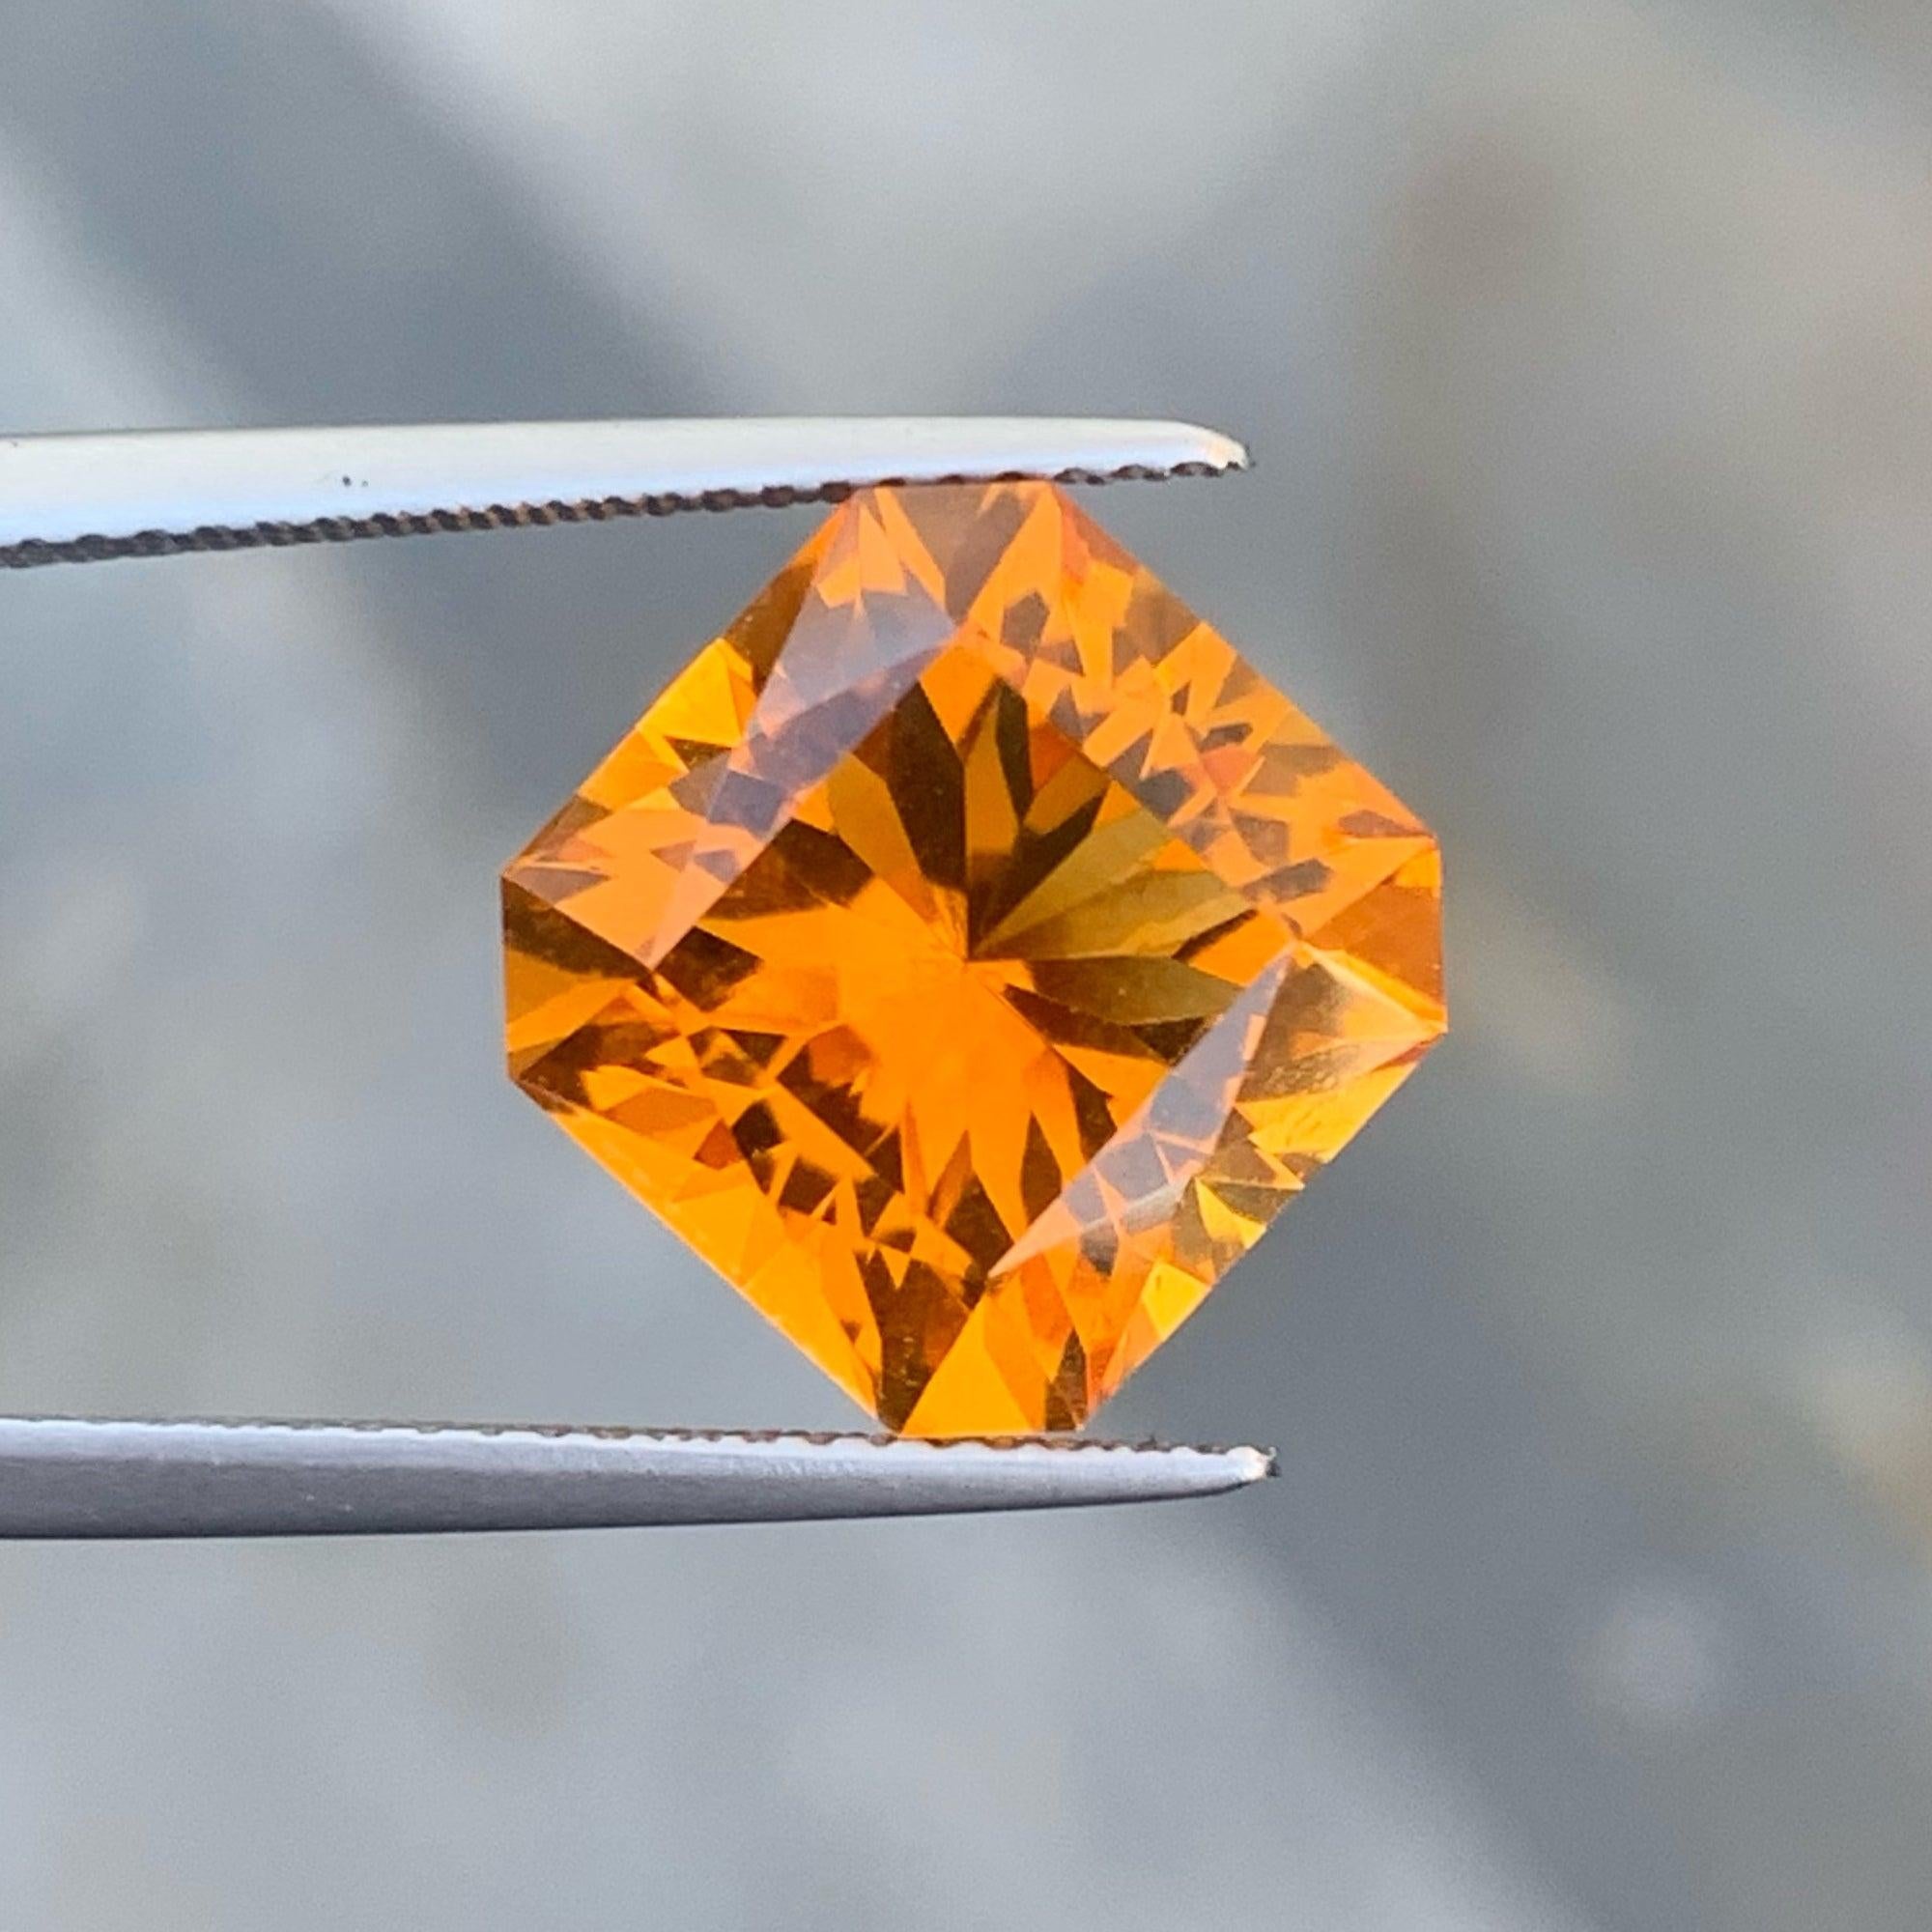 Lovely Madeira Citrine Gemstone, Available for sale at whole sale price natural high quality 7.45 Carats Loupe Clean Clarity Unheated Citrine From Madeira.

Product Information:
GEMSTONE TYPE: Lovely Madeira Citrine Gemstone
WEIGHT: 7.45